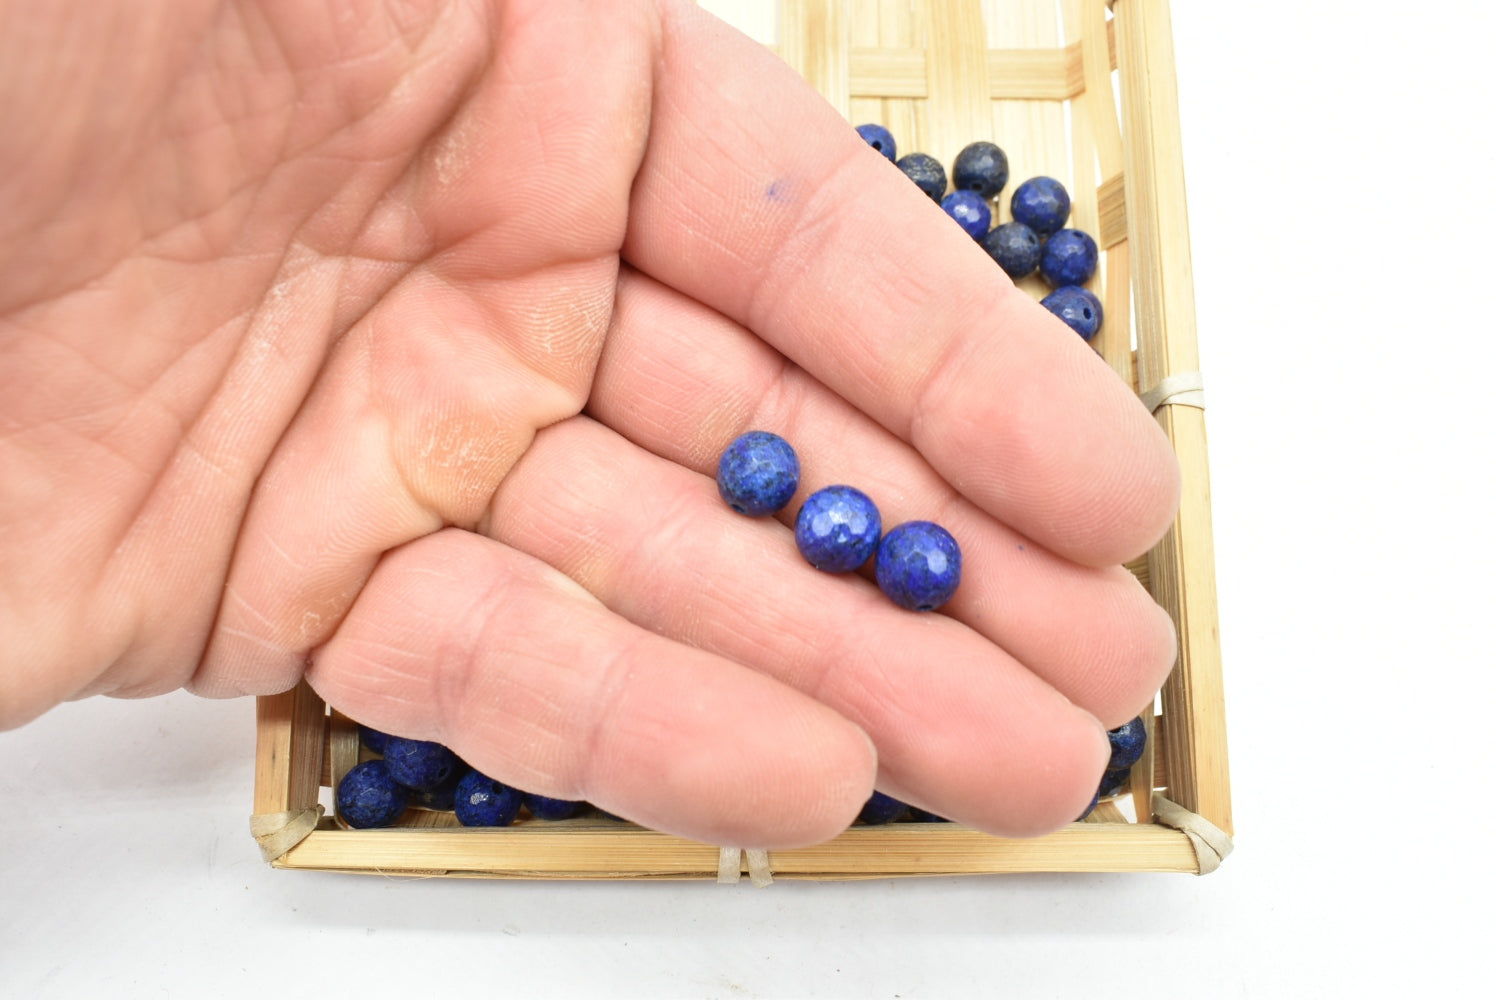 Lapis Lazuli Beads Faceted 8 mm Perforated - 5 Beads